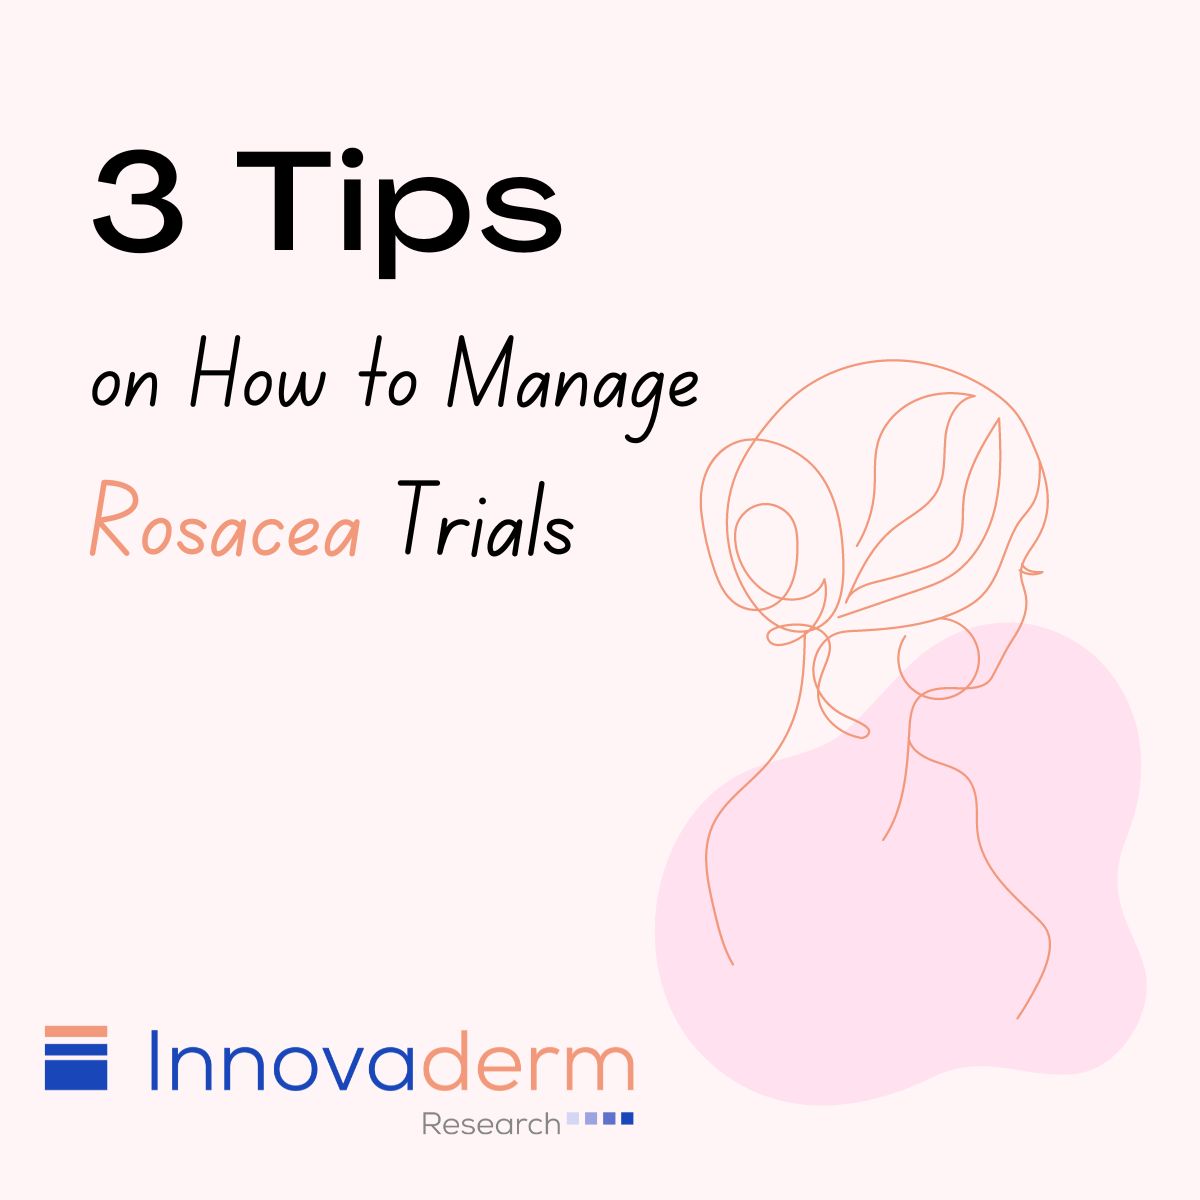 3 Tips on How to Manage Rosacea Trials